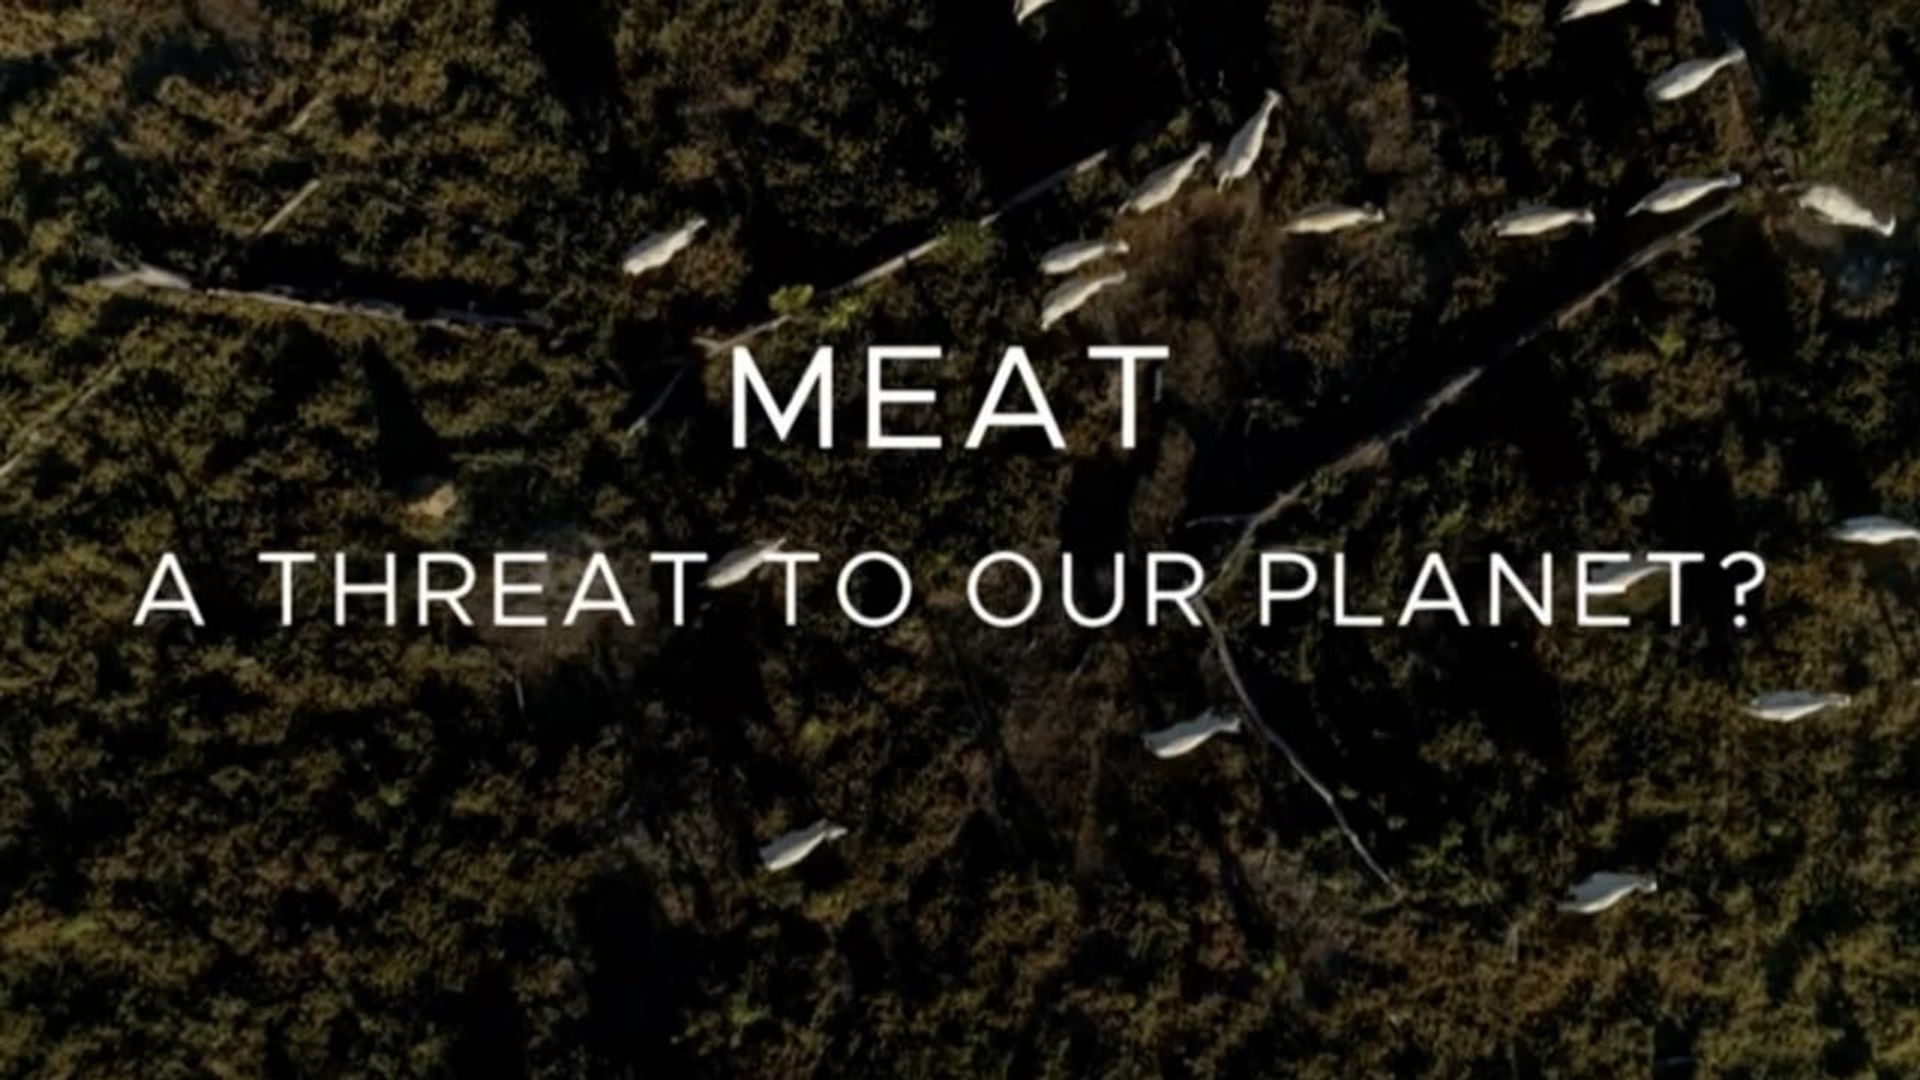 Meat: A Threat to Our Planet background